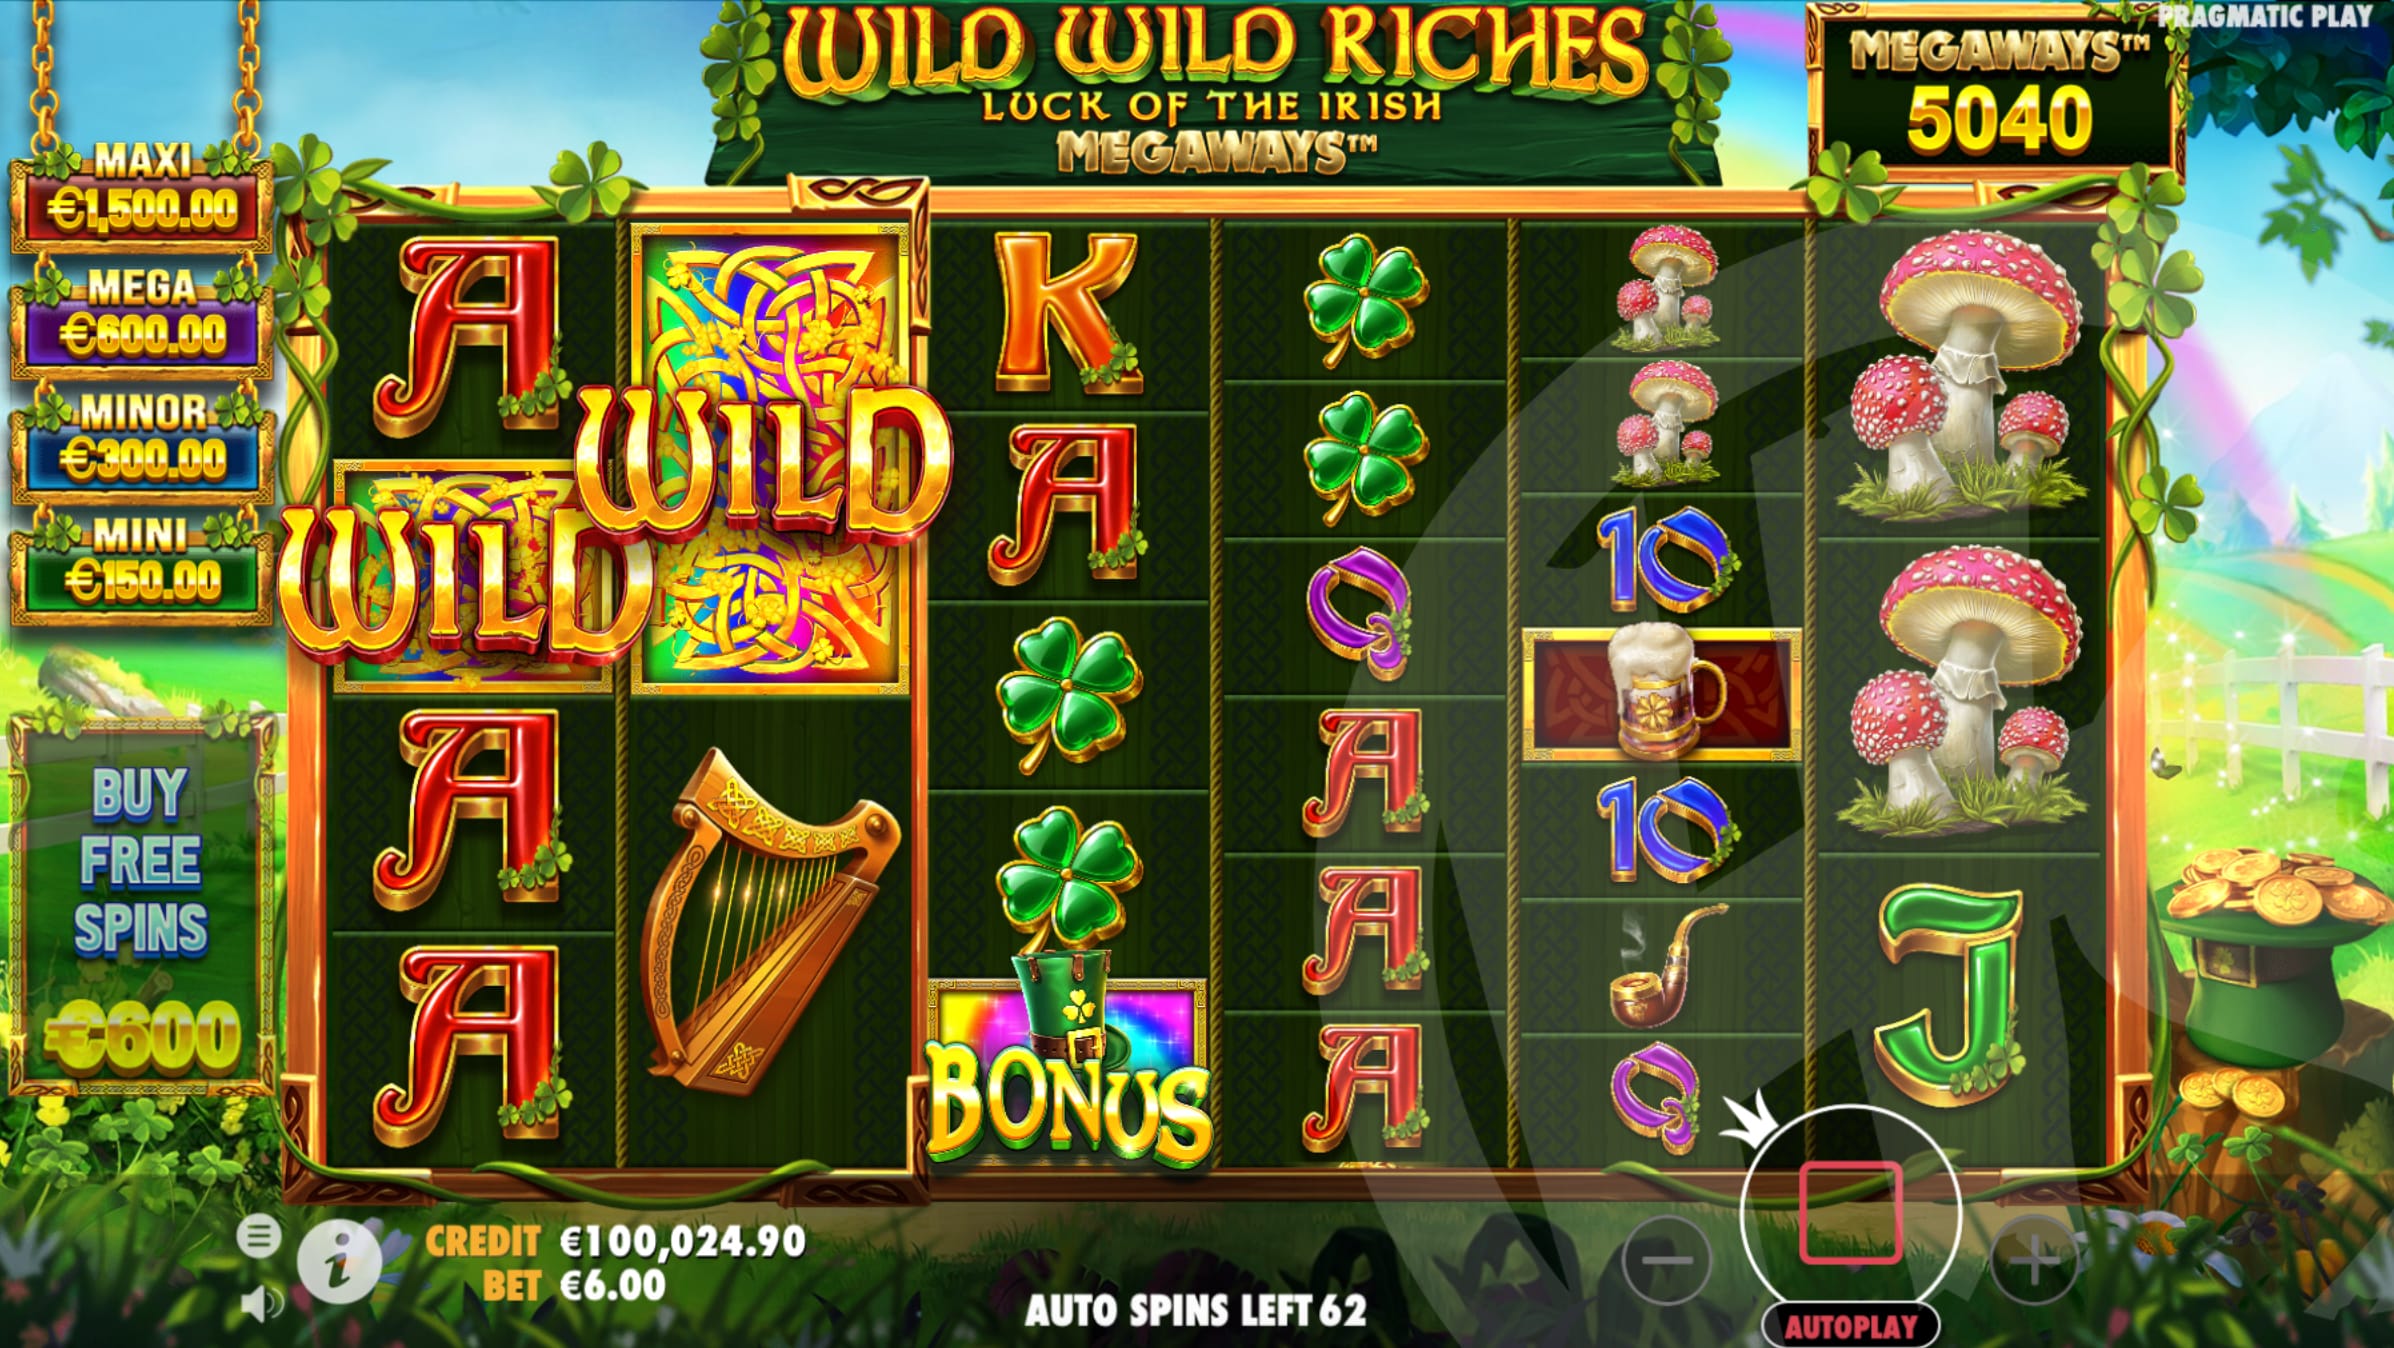 Land Wilds on Reel 1 and 2 With a Bonus Symbol on Reel 3 to Trigger Free Spins